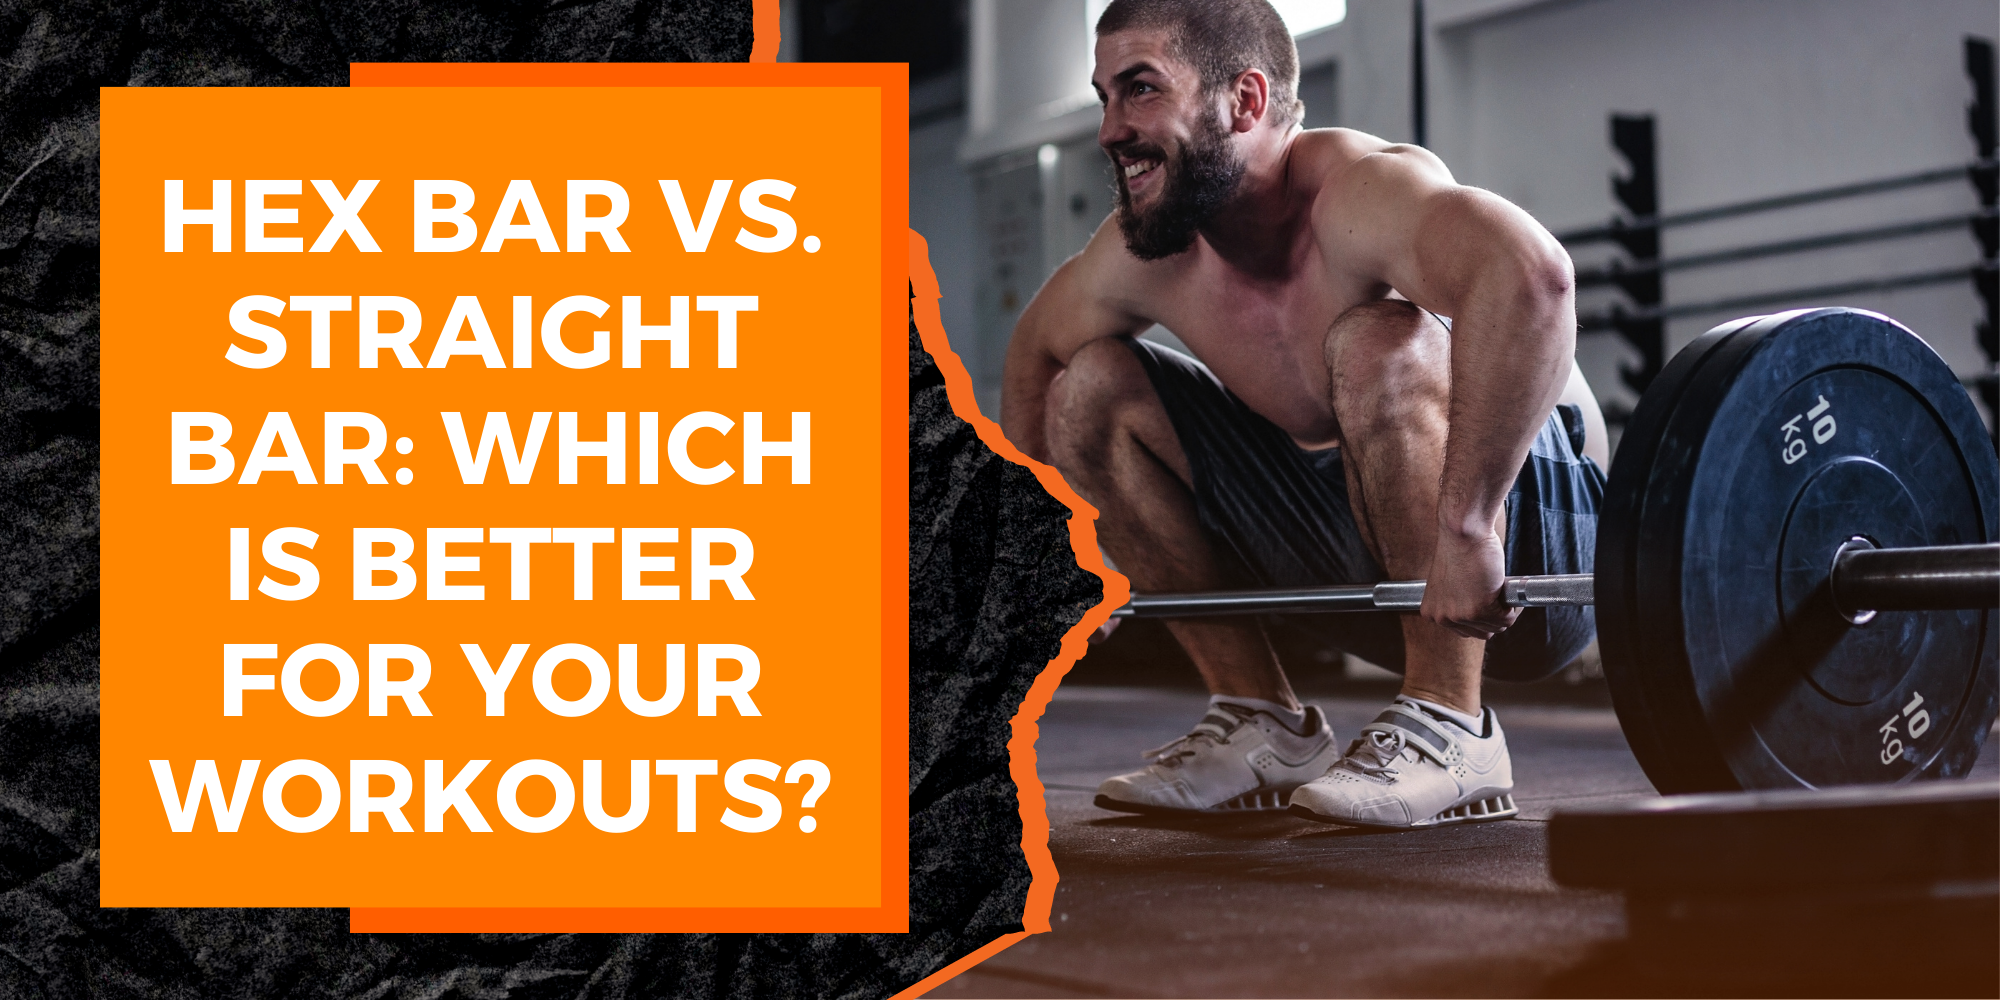 Hex Bar vs. Straight Bar: Which is Better for Your Workouts?